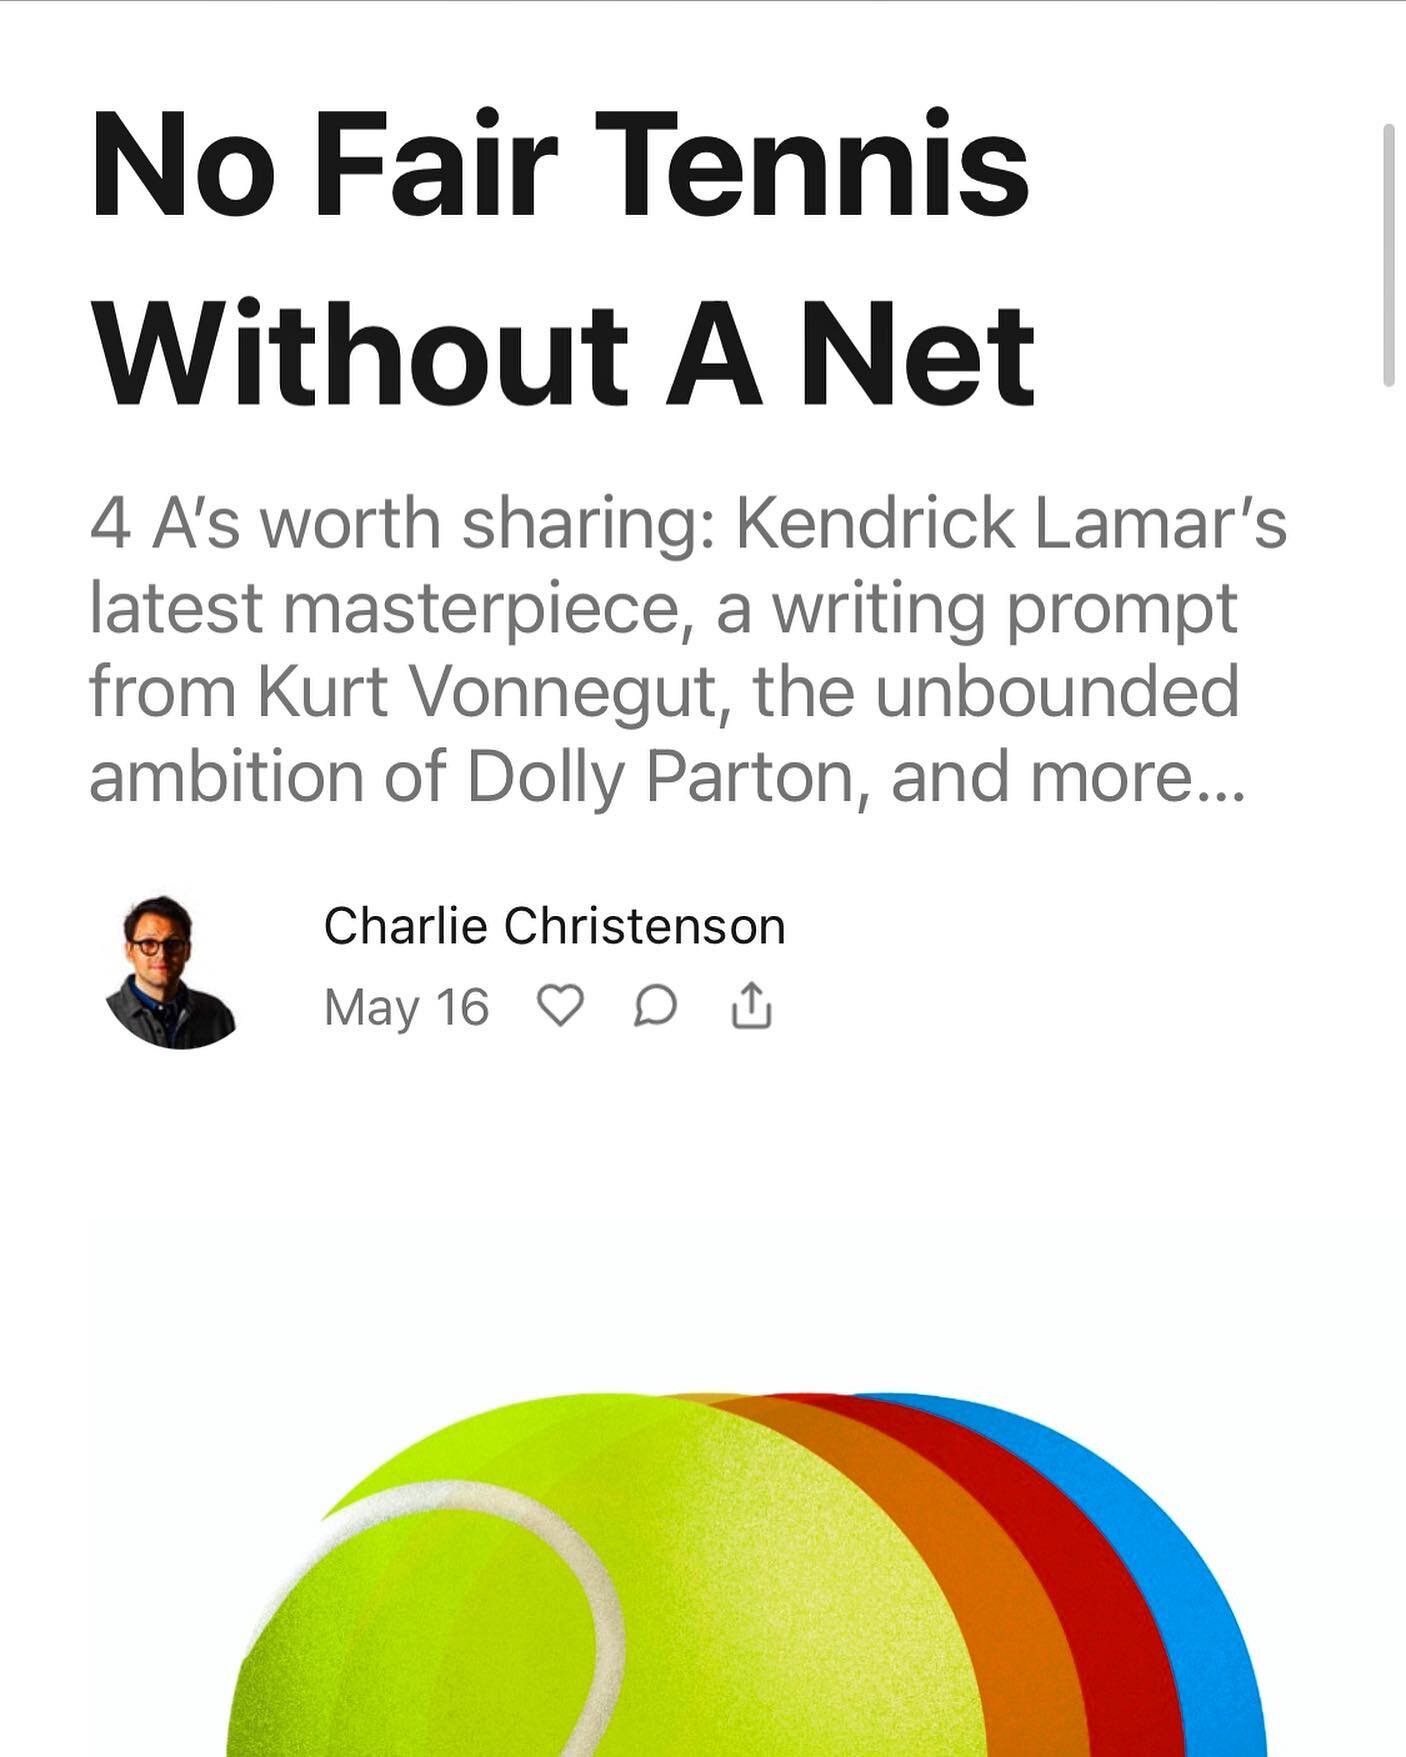 4 A&rsquo;s worth sharing this week: Kendrick Lamar&rsquo;s latest masterpiece, a writing prompt from Kurt Vonnegut, the unbounded ambition of Dolly Parton, and more&hellip;

foraymusic.substack.com